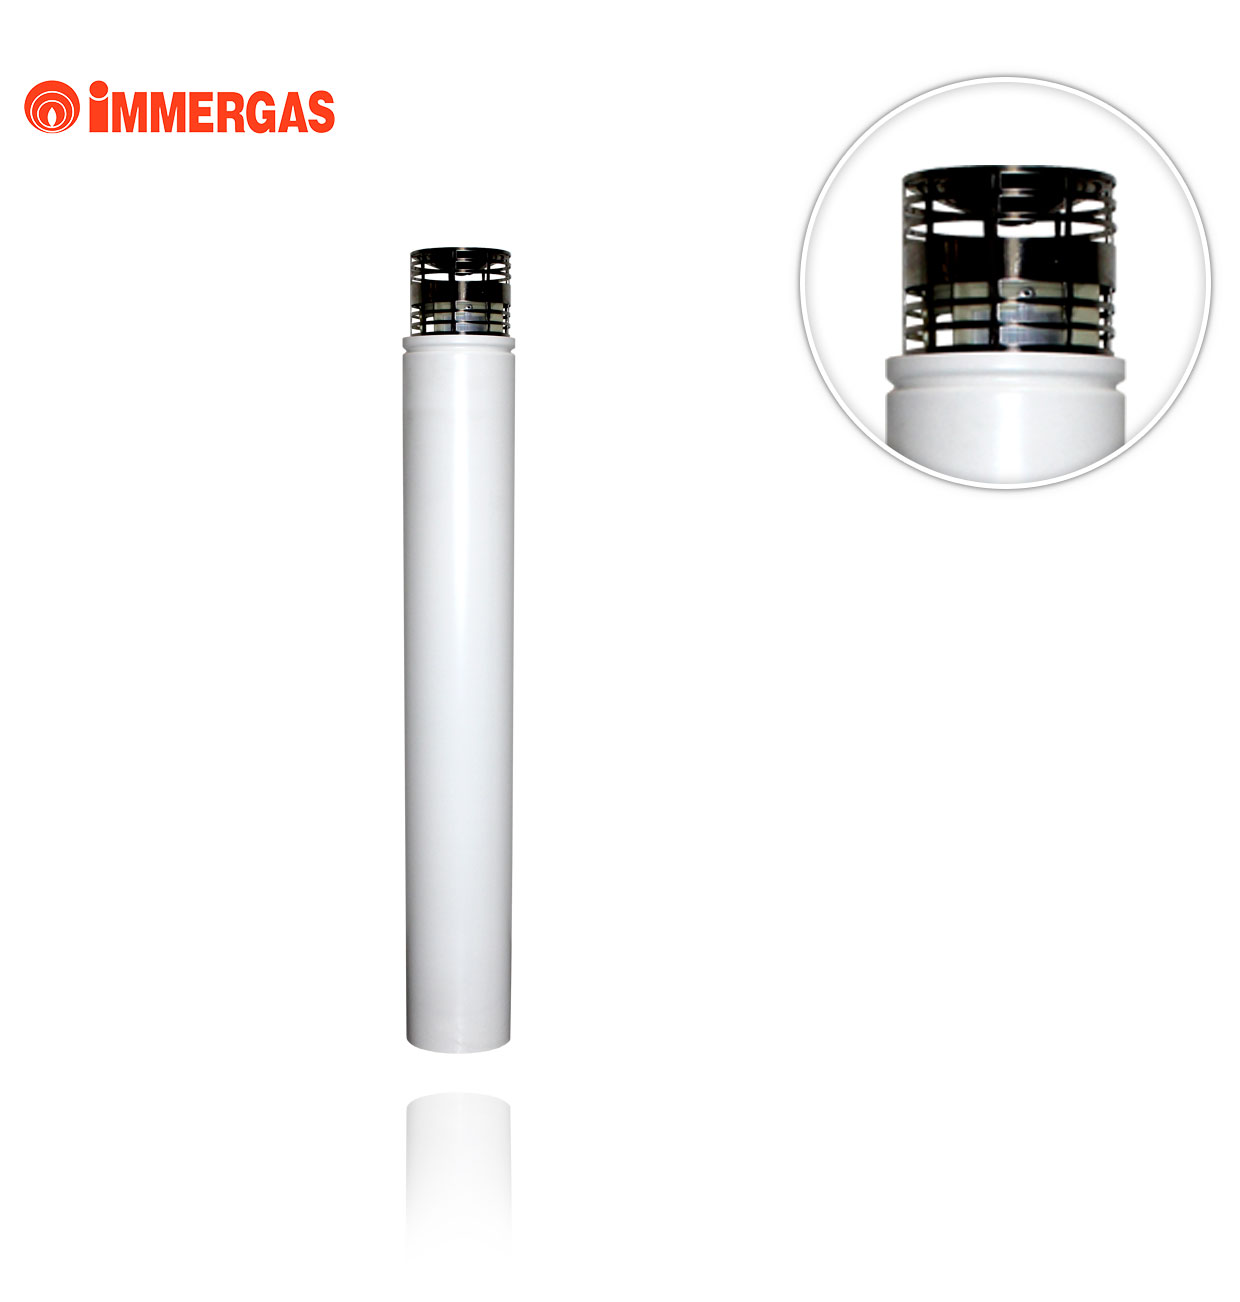 60/100 IMMERGAS HORIZONTAL CONCENTRIC KIT